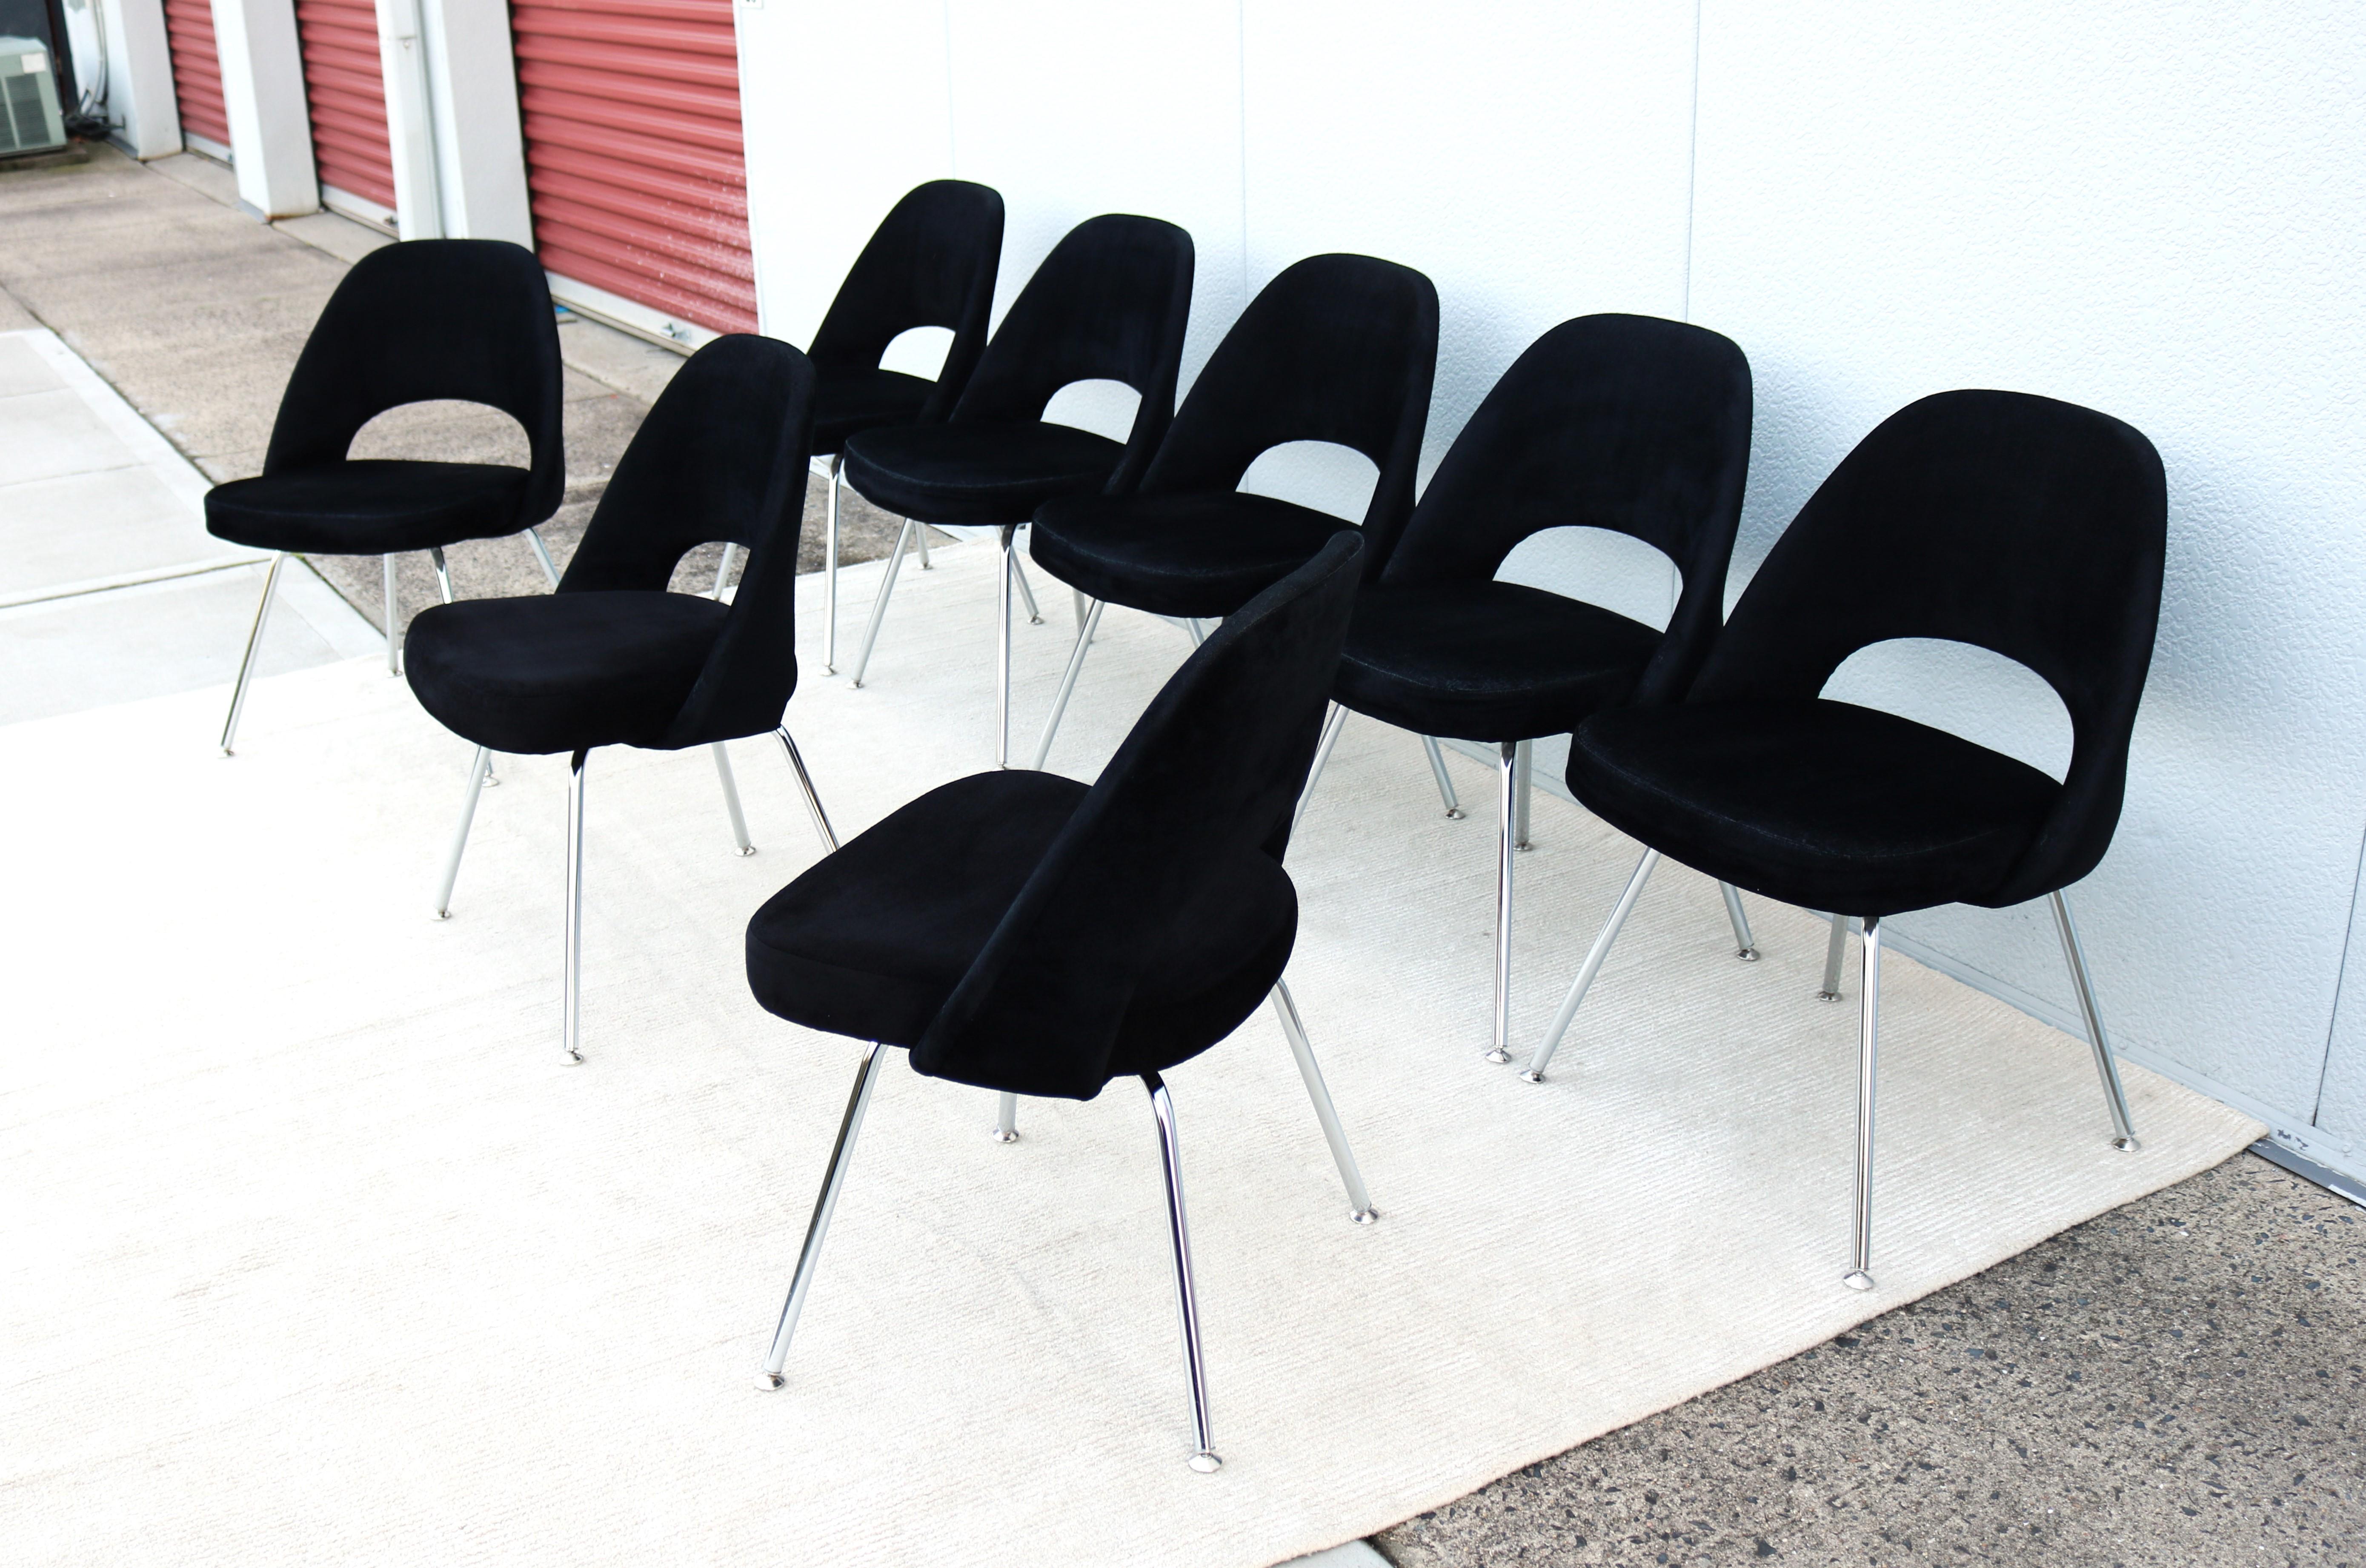 Molded Mid-Century Modern Eero Saarinen for Knoll Executive Armless Chairs - Set of 8 For Sale